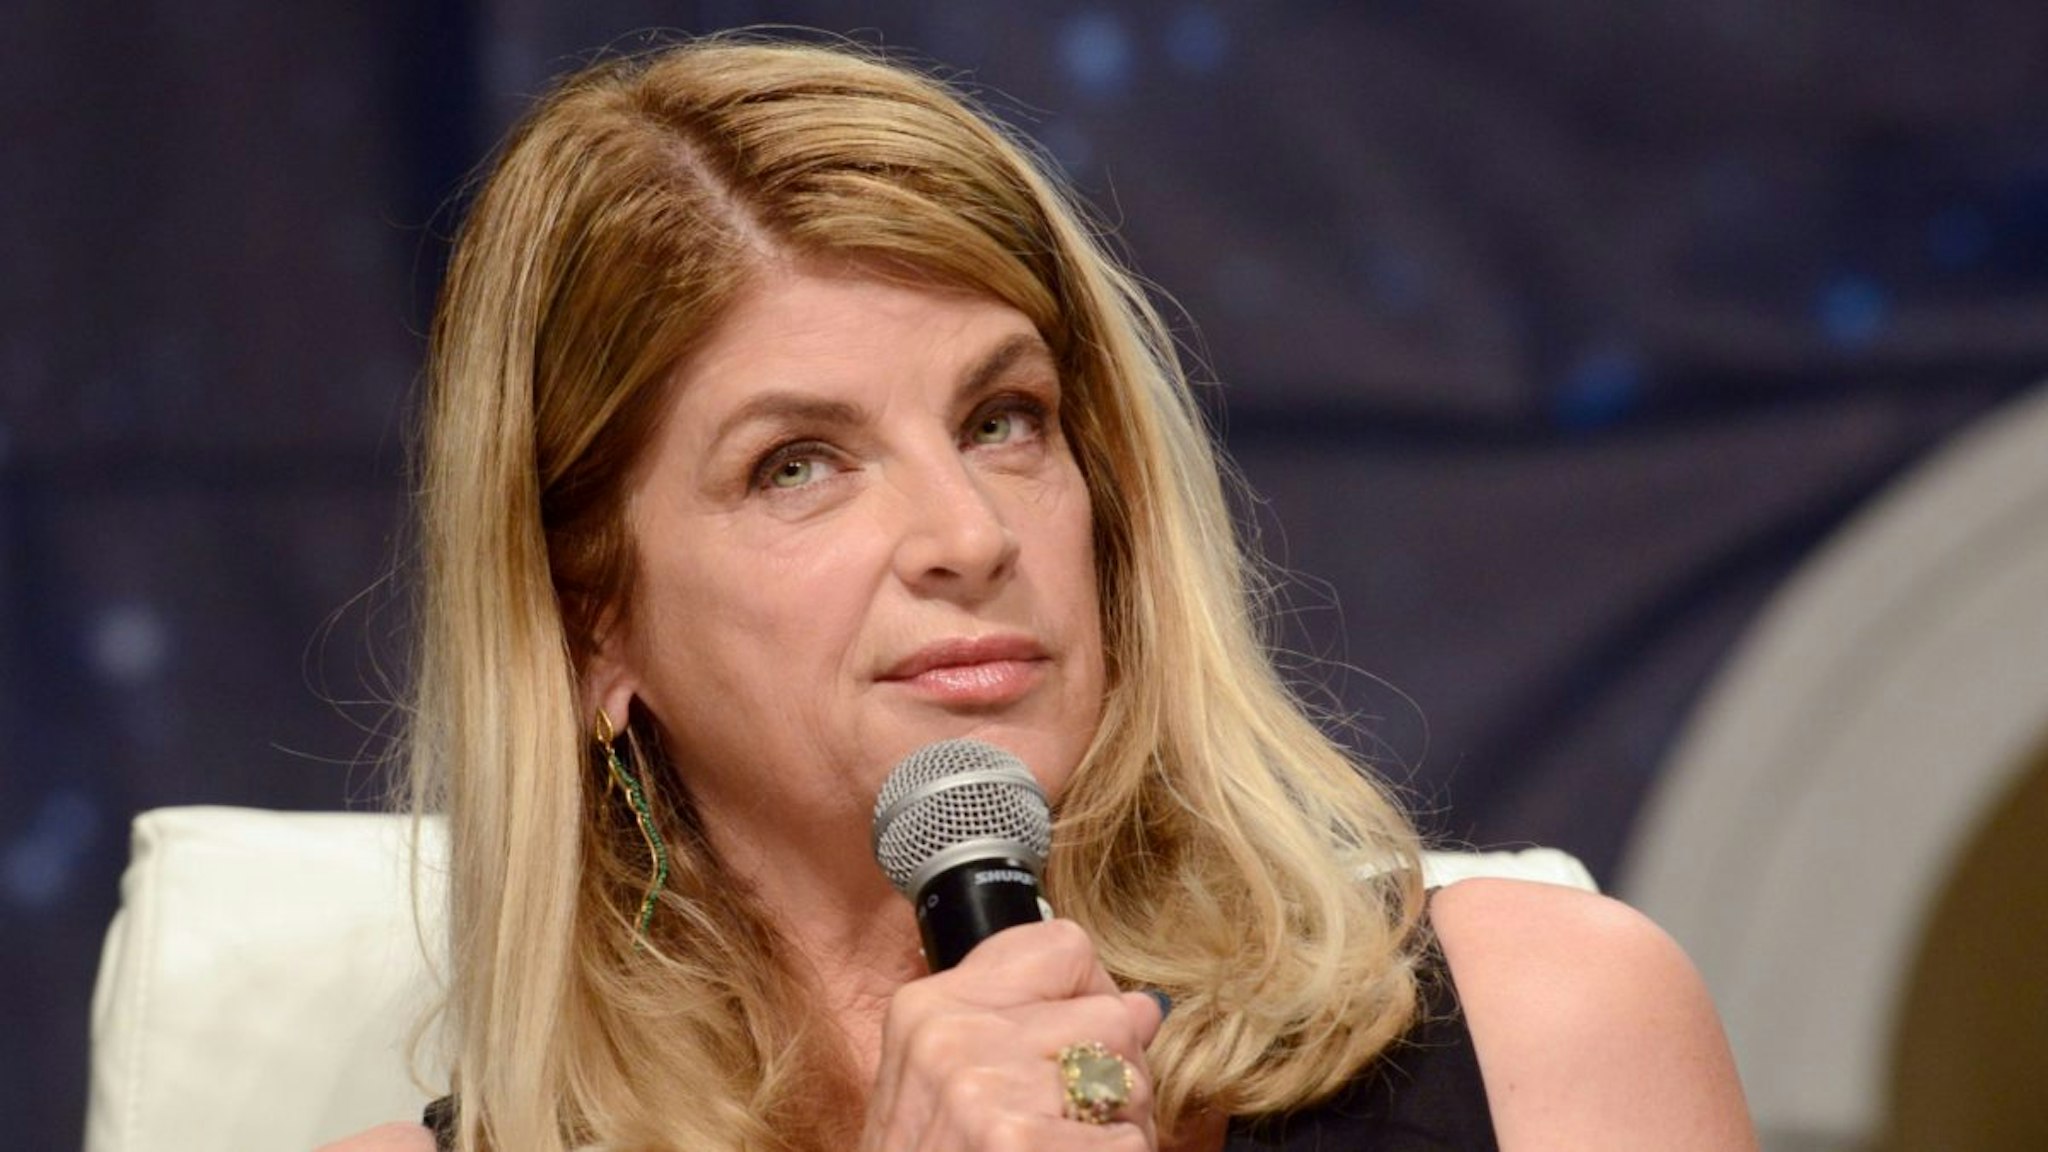 Actress Kirstie Alley on day 3 of Creation Entertainment's Official Star Trek 50th Anniversary Convention held at The Rio Hotel & Casino on August 5, 2016 in Las Vegas, Nevada.